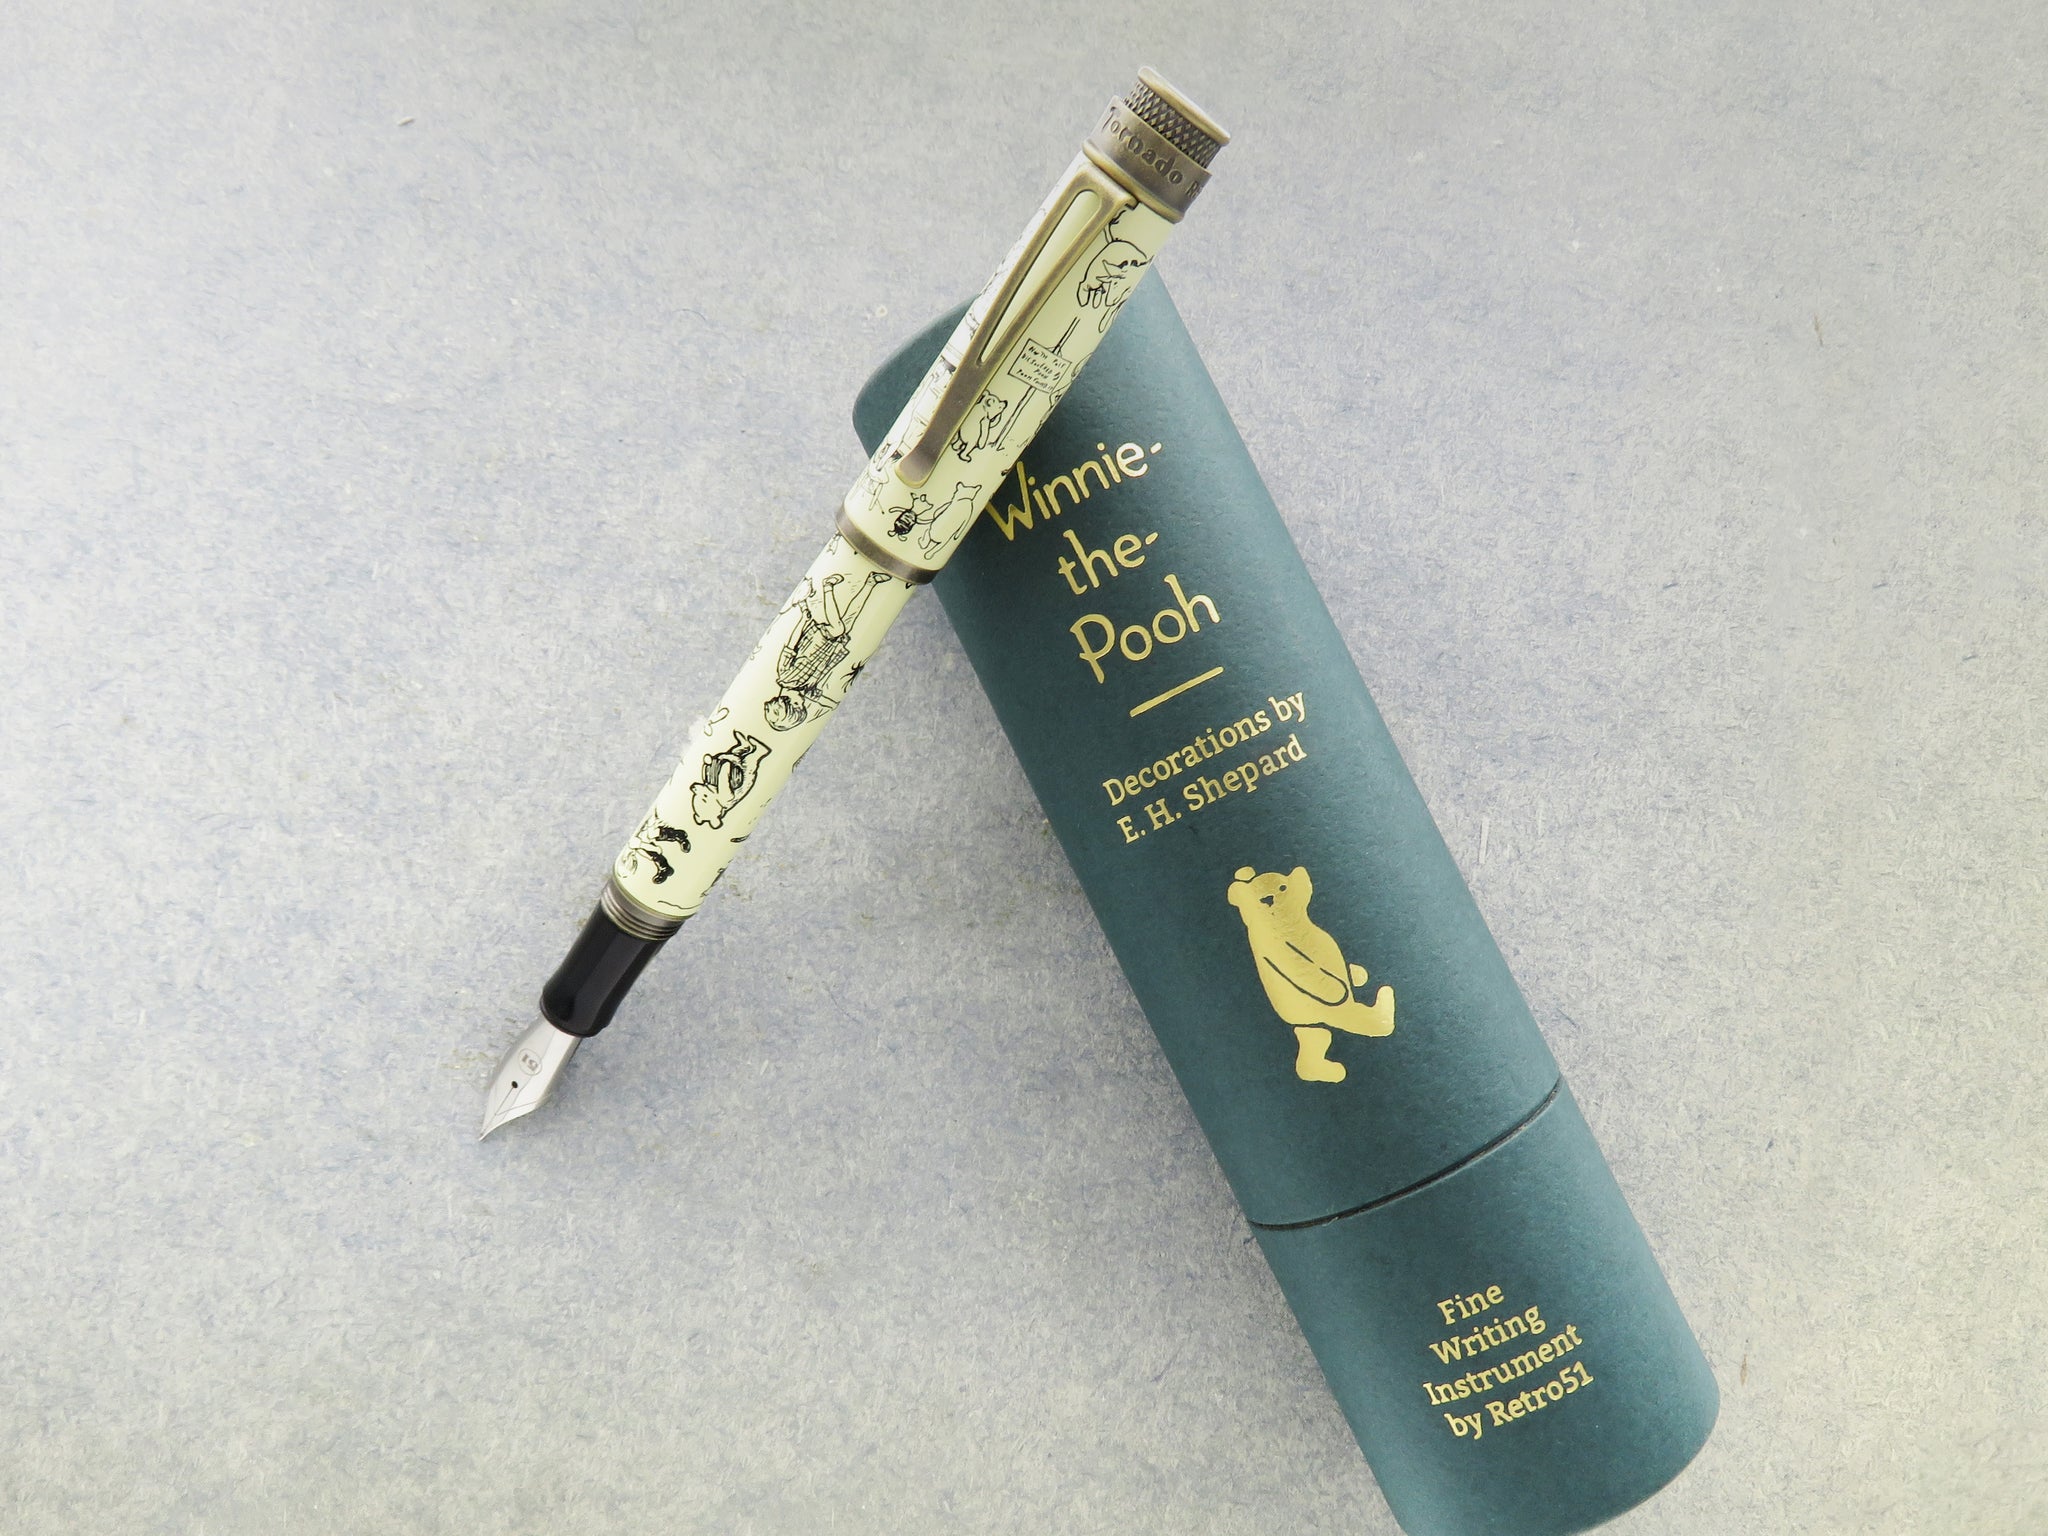 A.A. Milne Winnie-the-Pooh Decorations by E.H. Shepard Fountain Pen